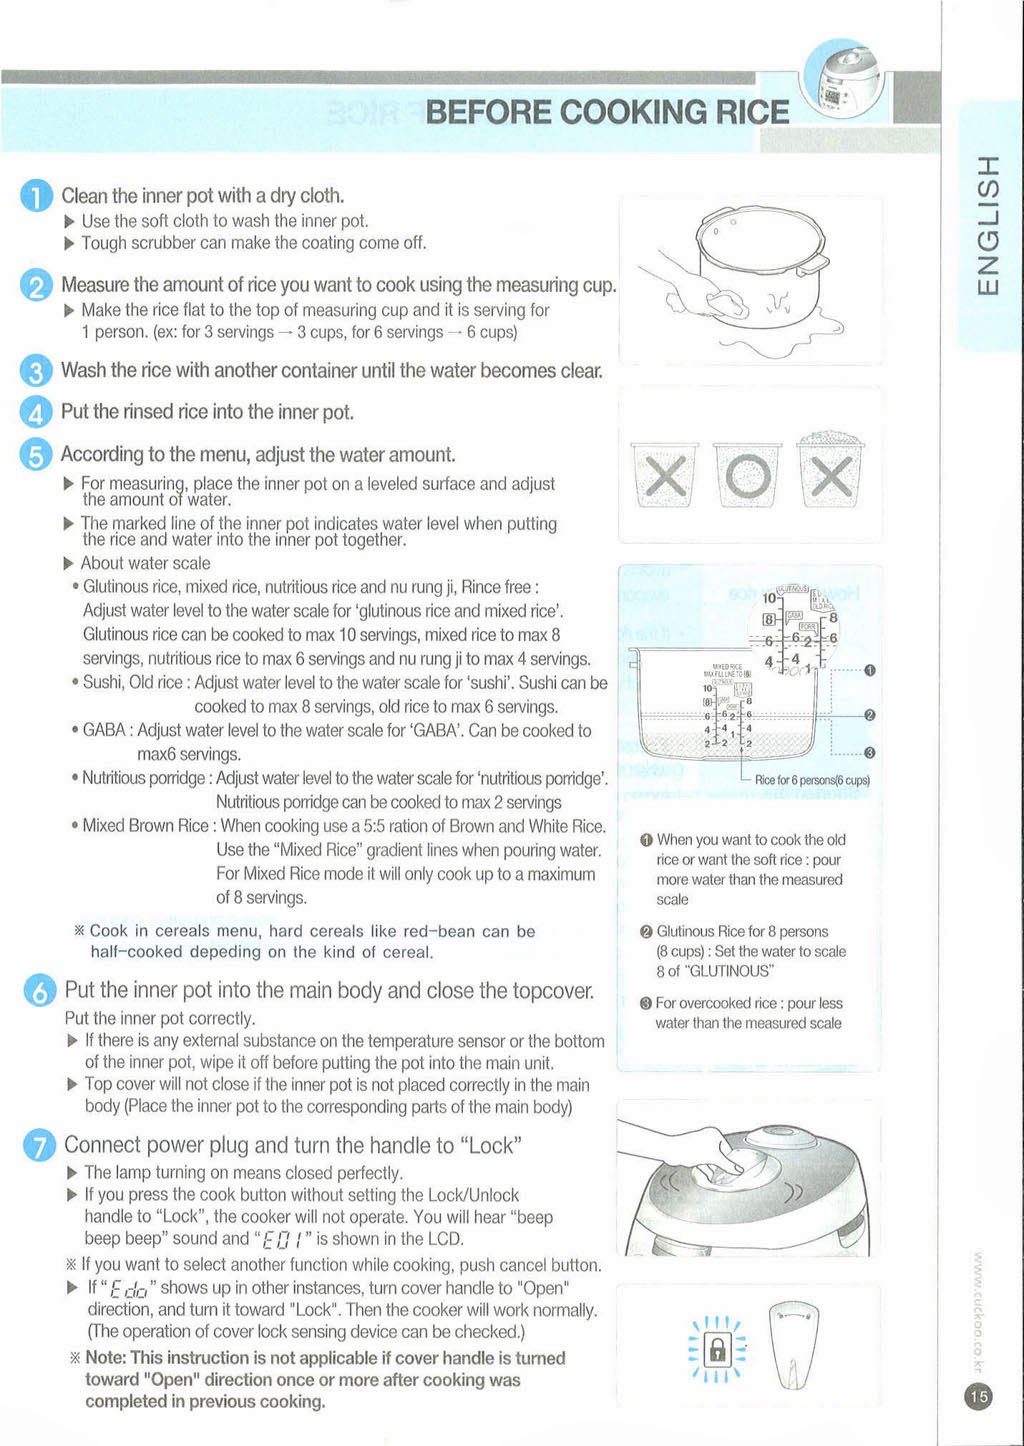 My Cuckoo Rice Cooker: Scanned Cuckoo Rice Cooker English Manual ...